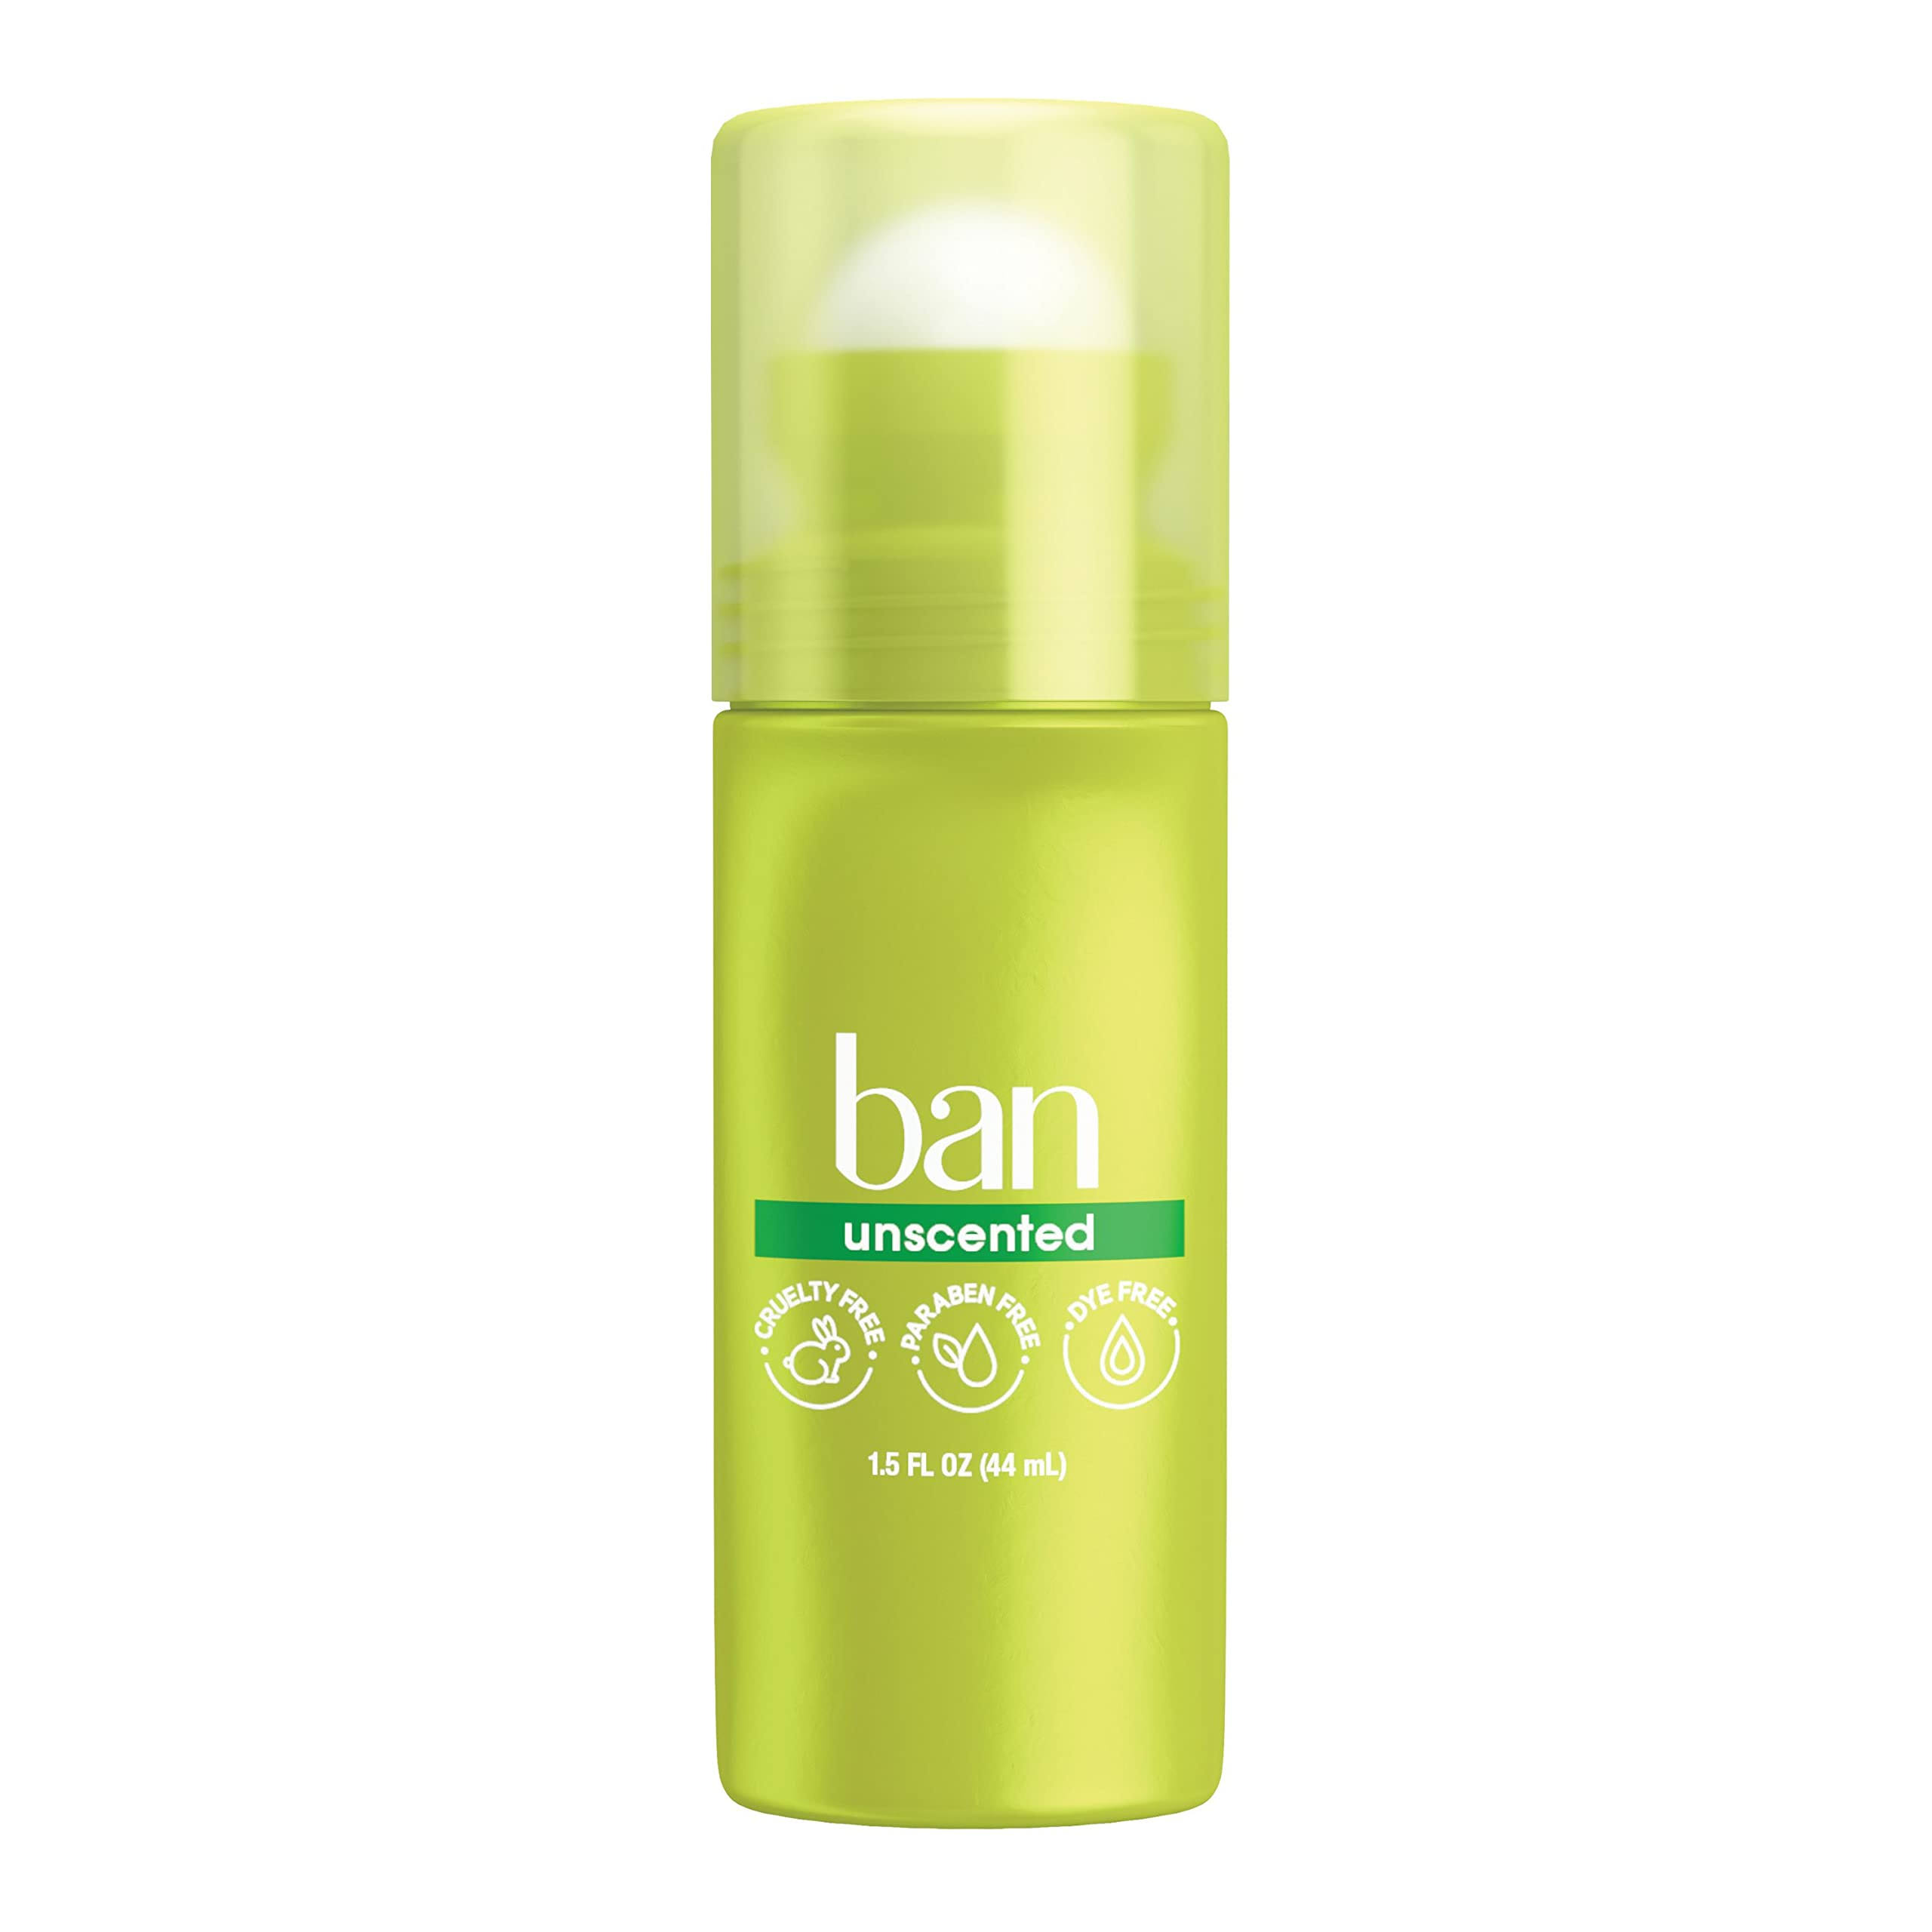 Ban Roll-On Antiperspirant and Deodorant - Unscented, 1.5oz